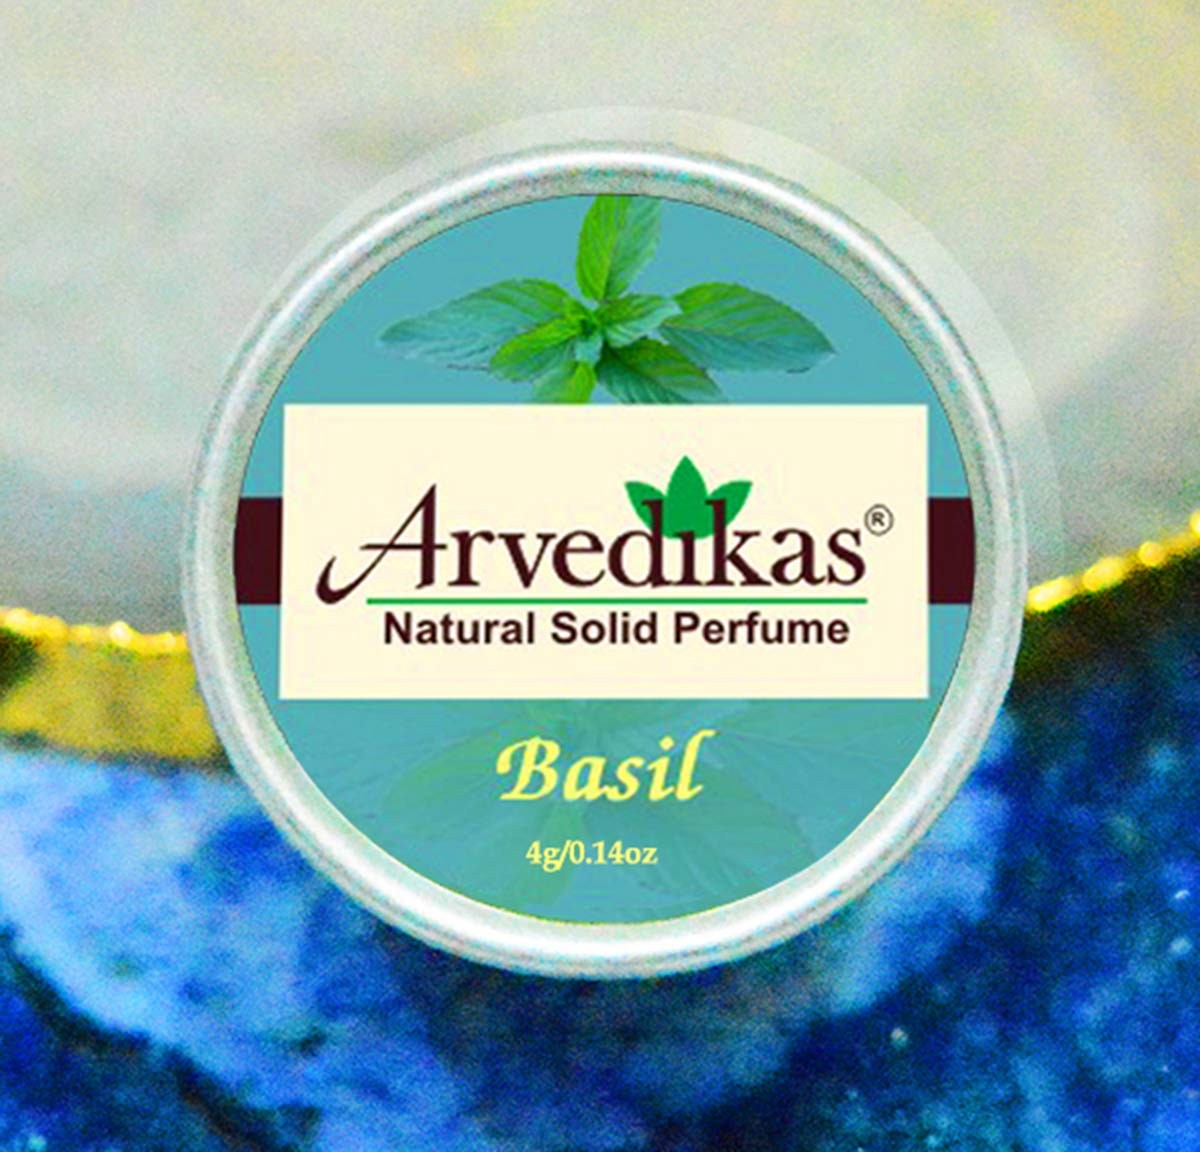 Basil Natural Solid Perfume Pocket Size Compact Cologne Scented Balm Skin Friendly Body Musk Parfum